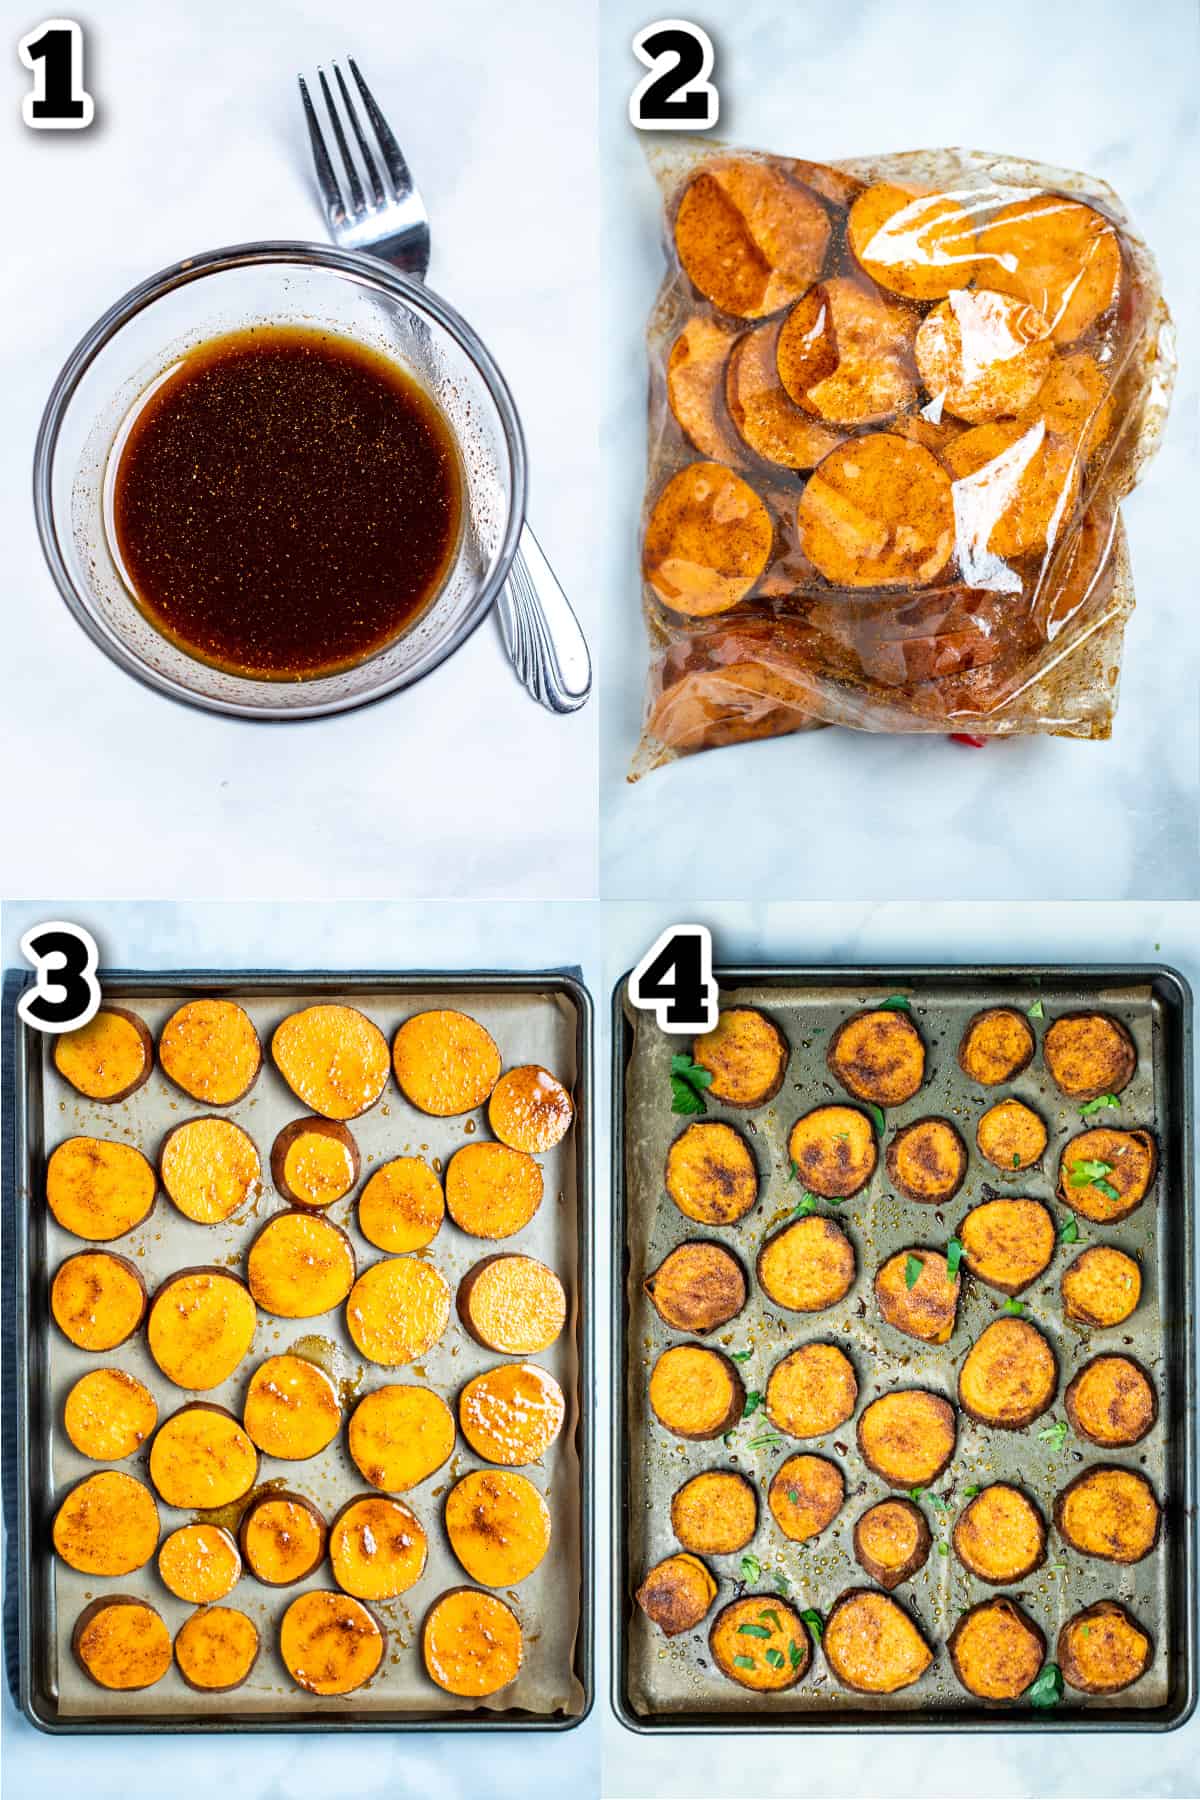 Step by step photos for how to make roasted sweet potato slices.